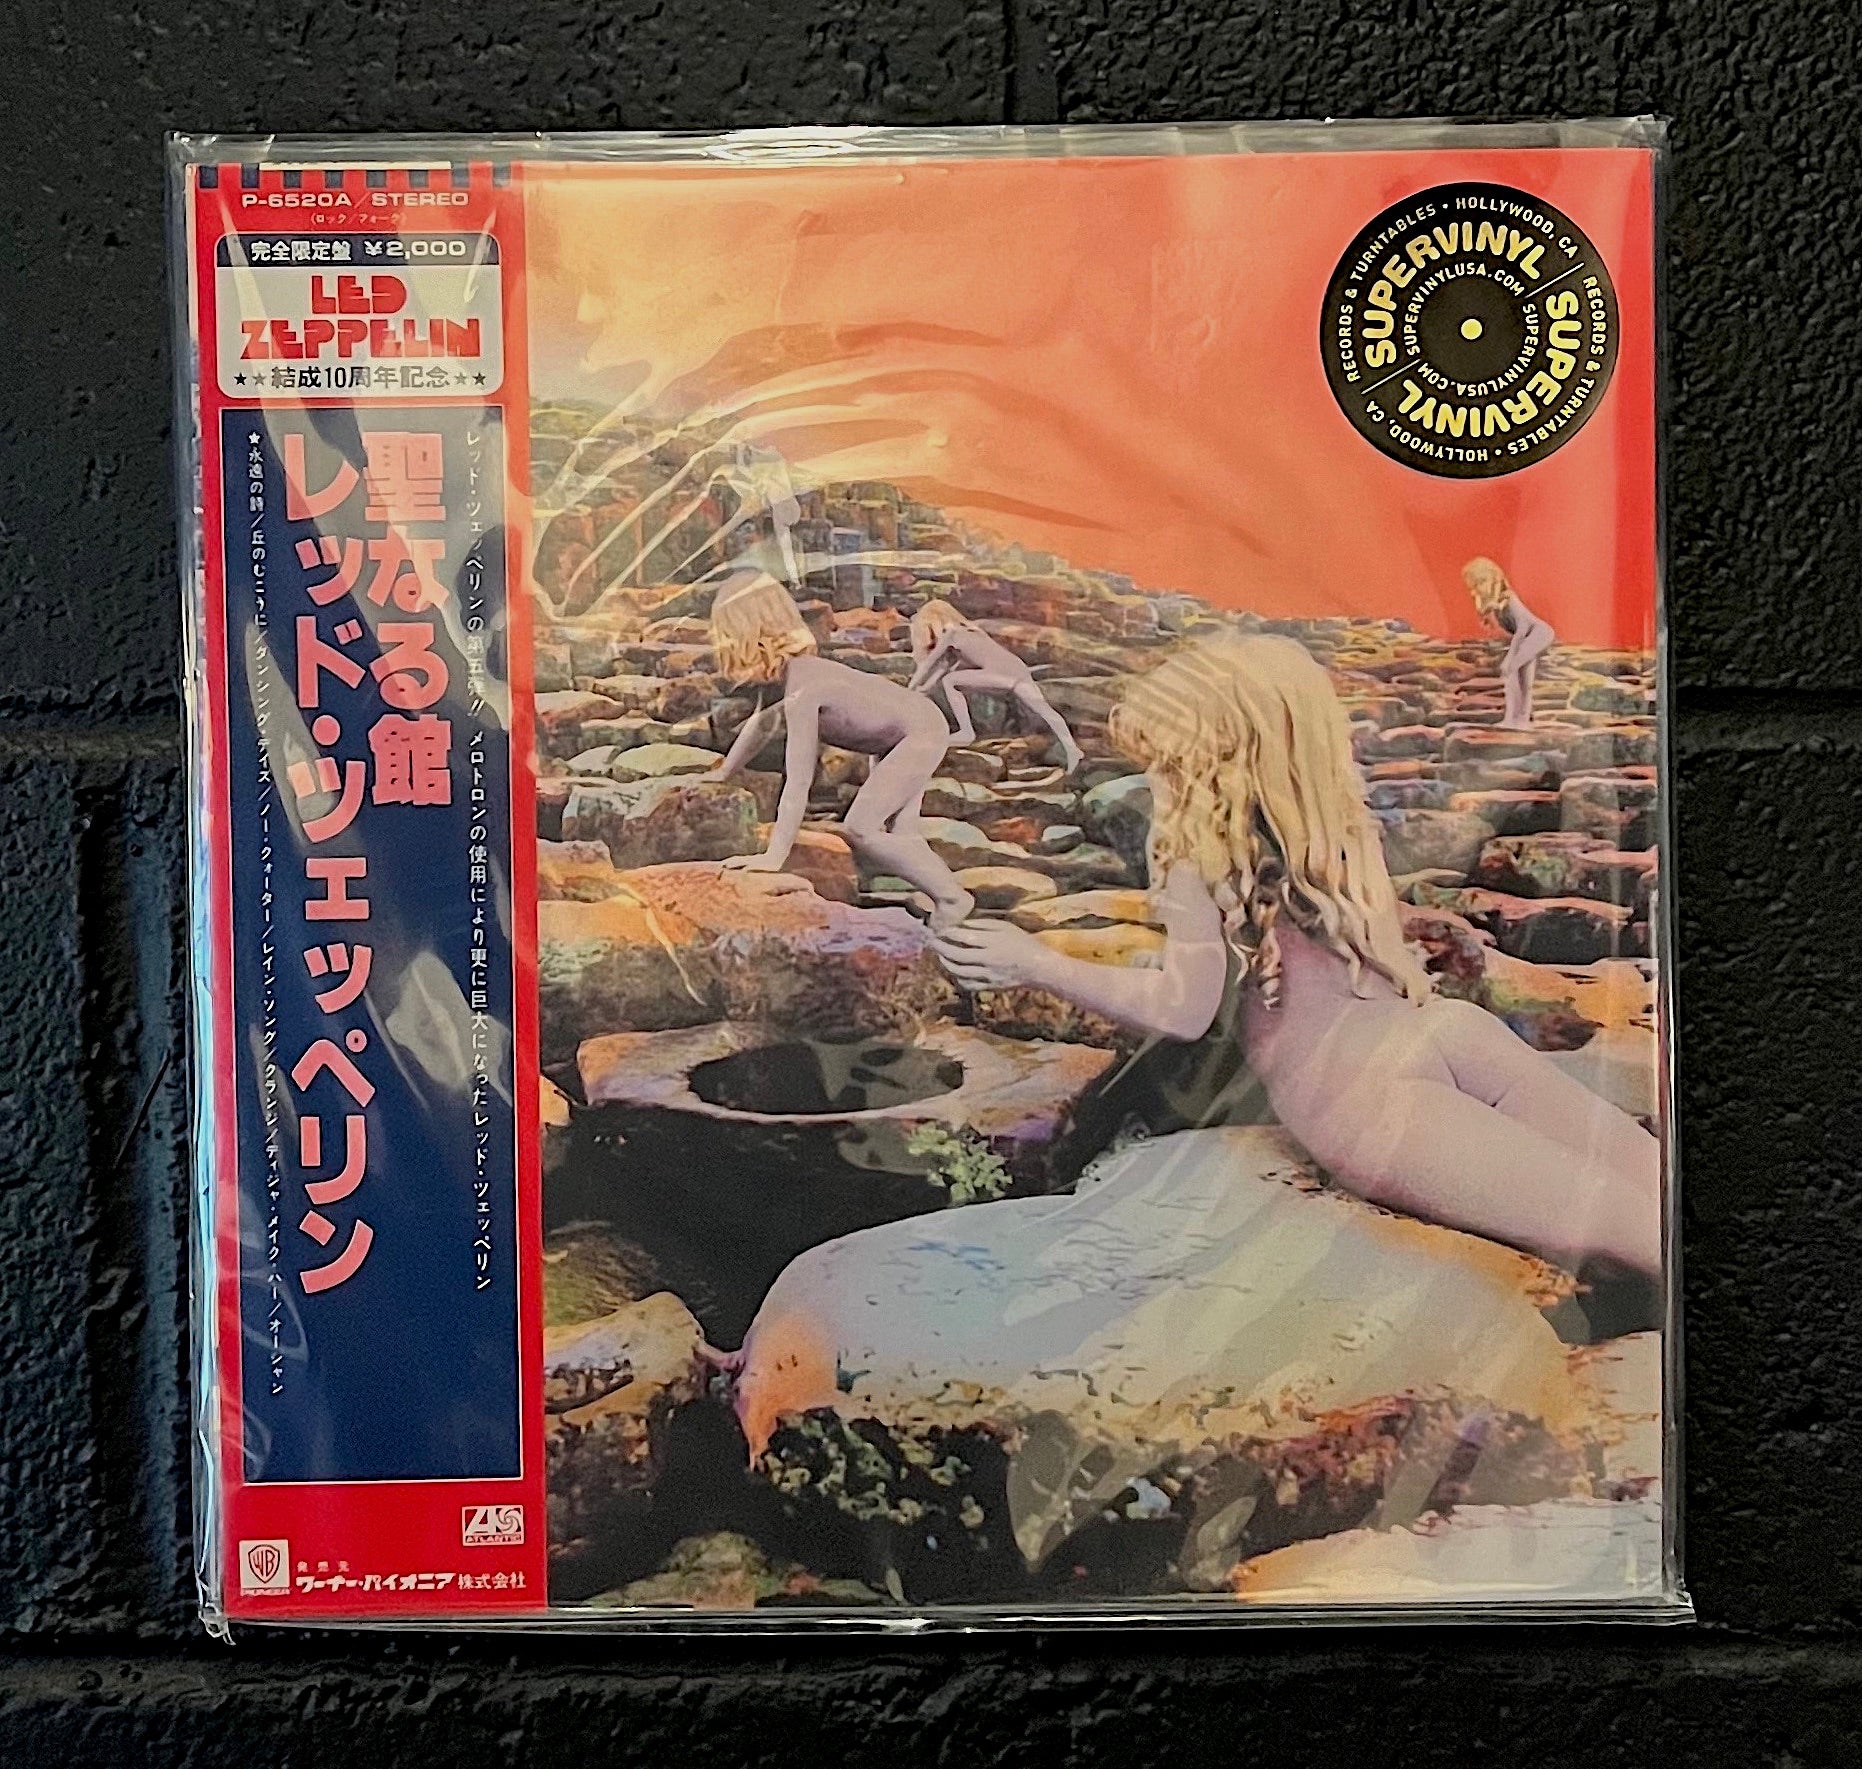 Houses of the Holy 1979 Japanese LP with obi